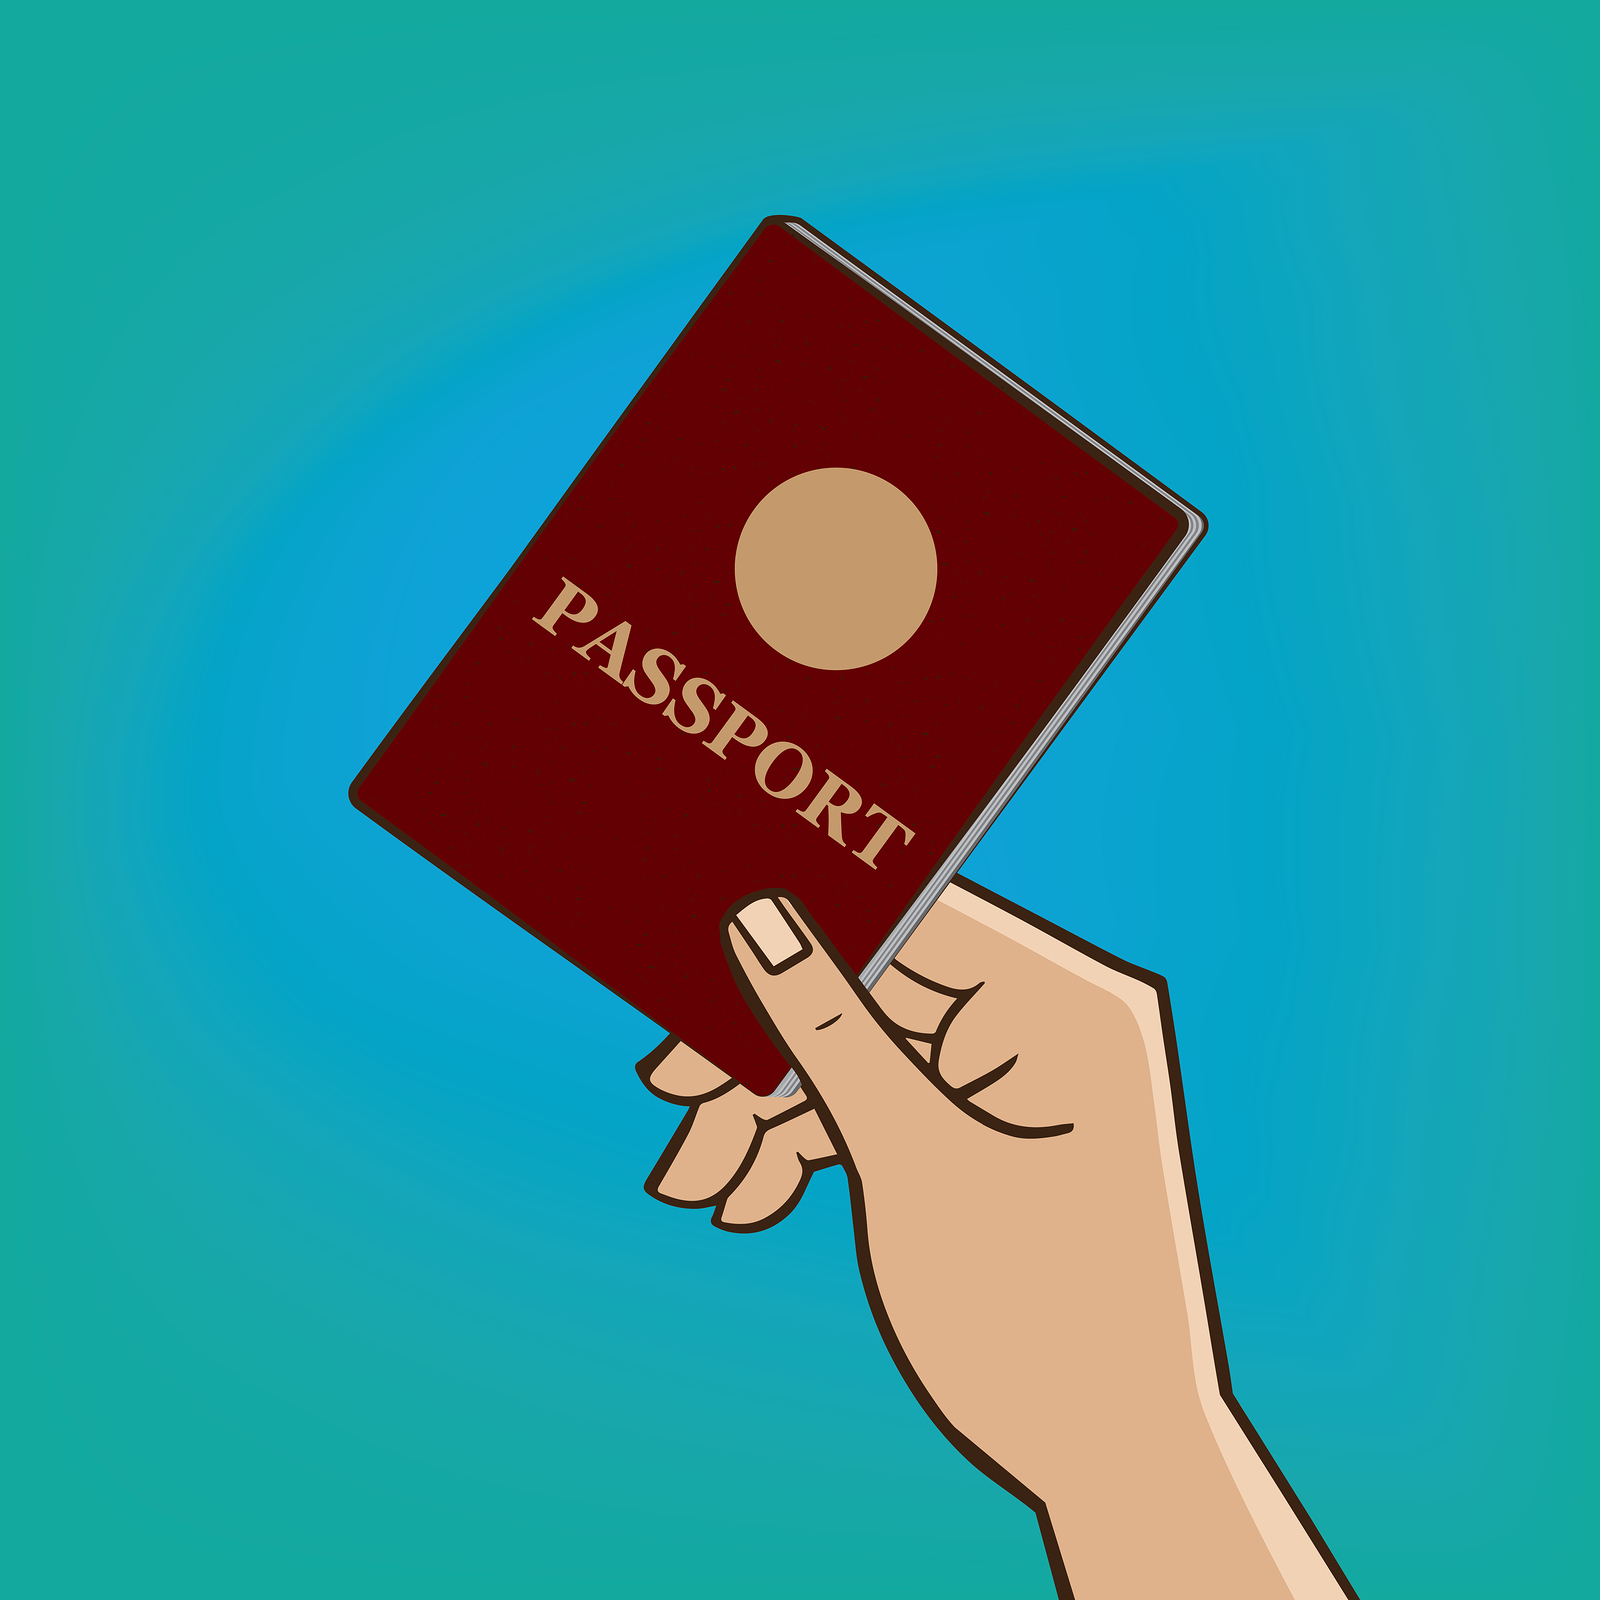 Man extends his hand with the passport - verification of documents or passport control concept